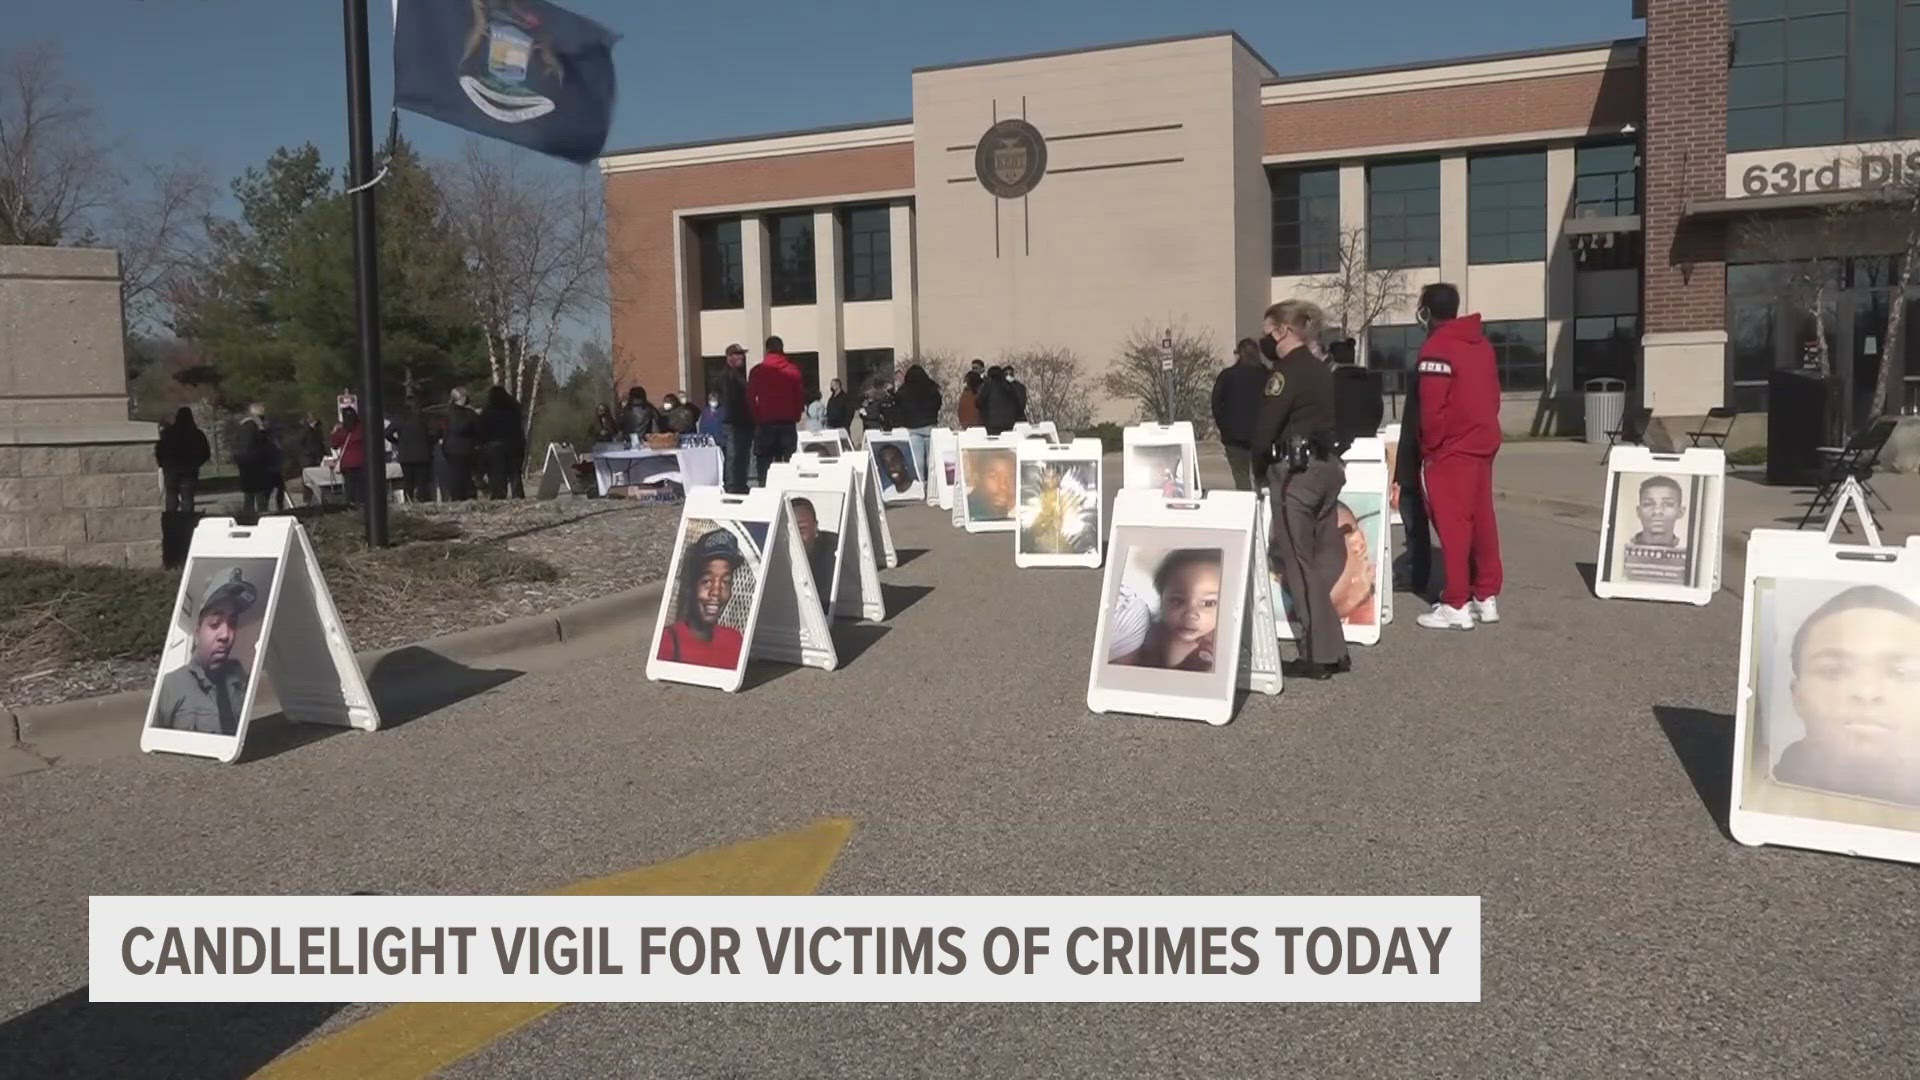 A vigil is being held in Grand Rapids for victims of crimes.